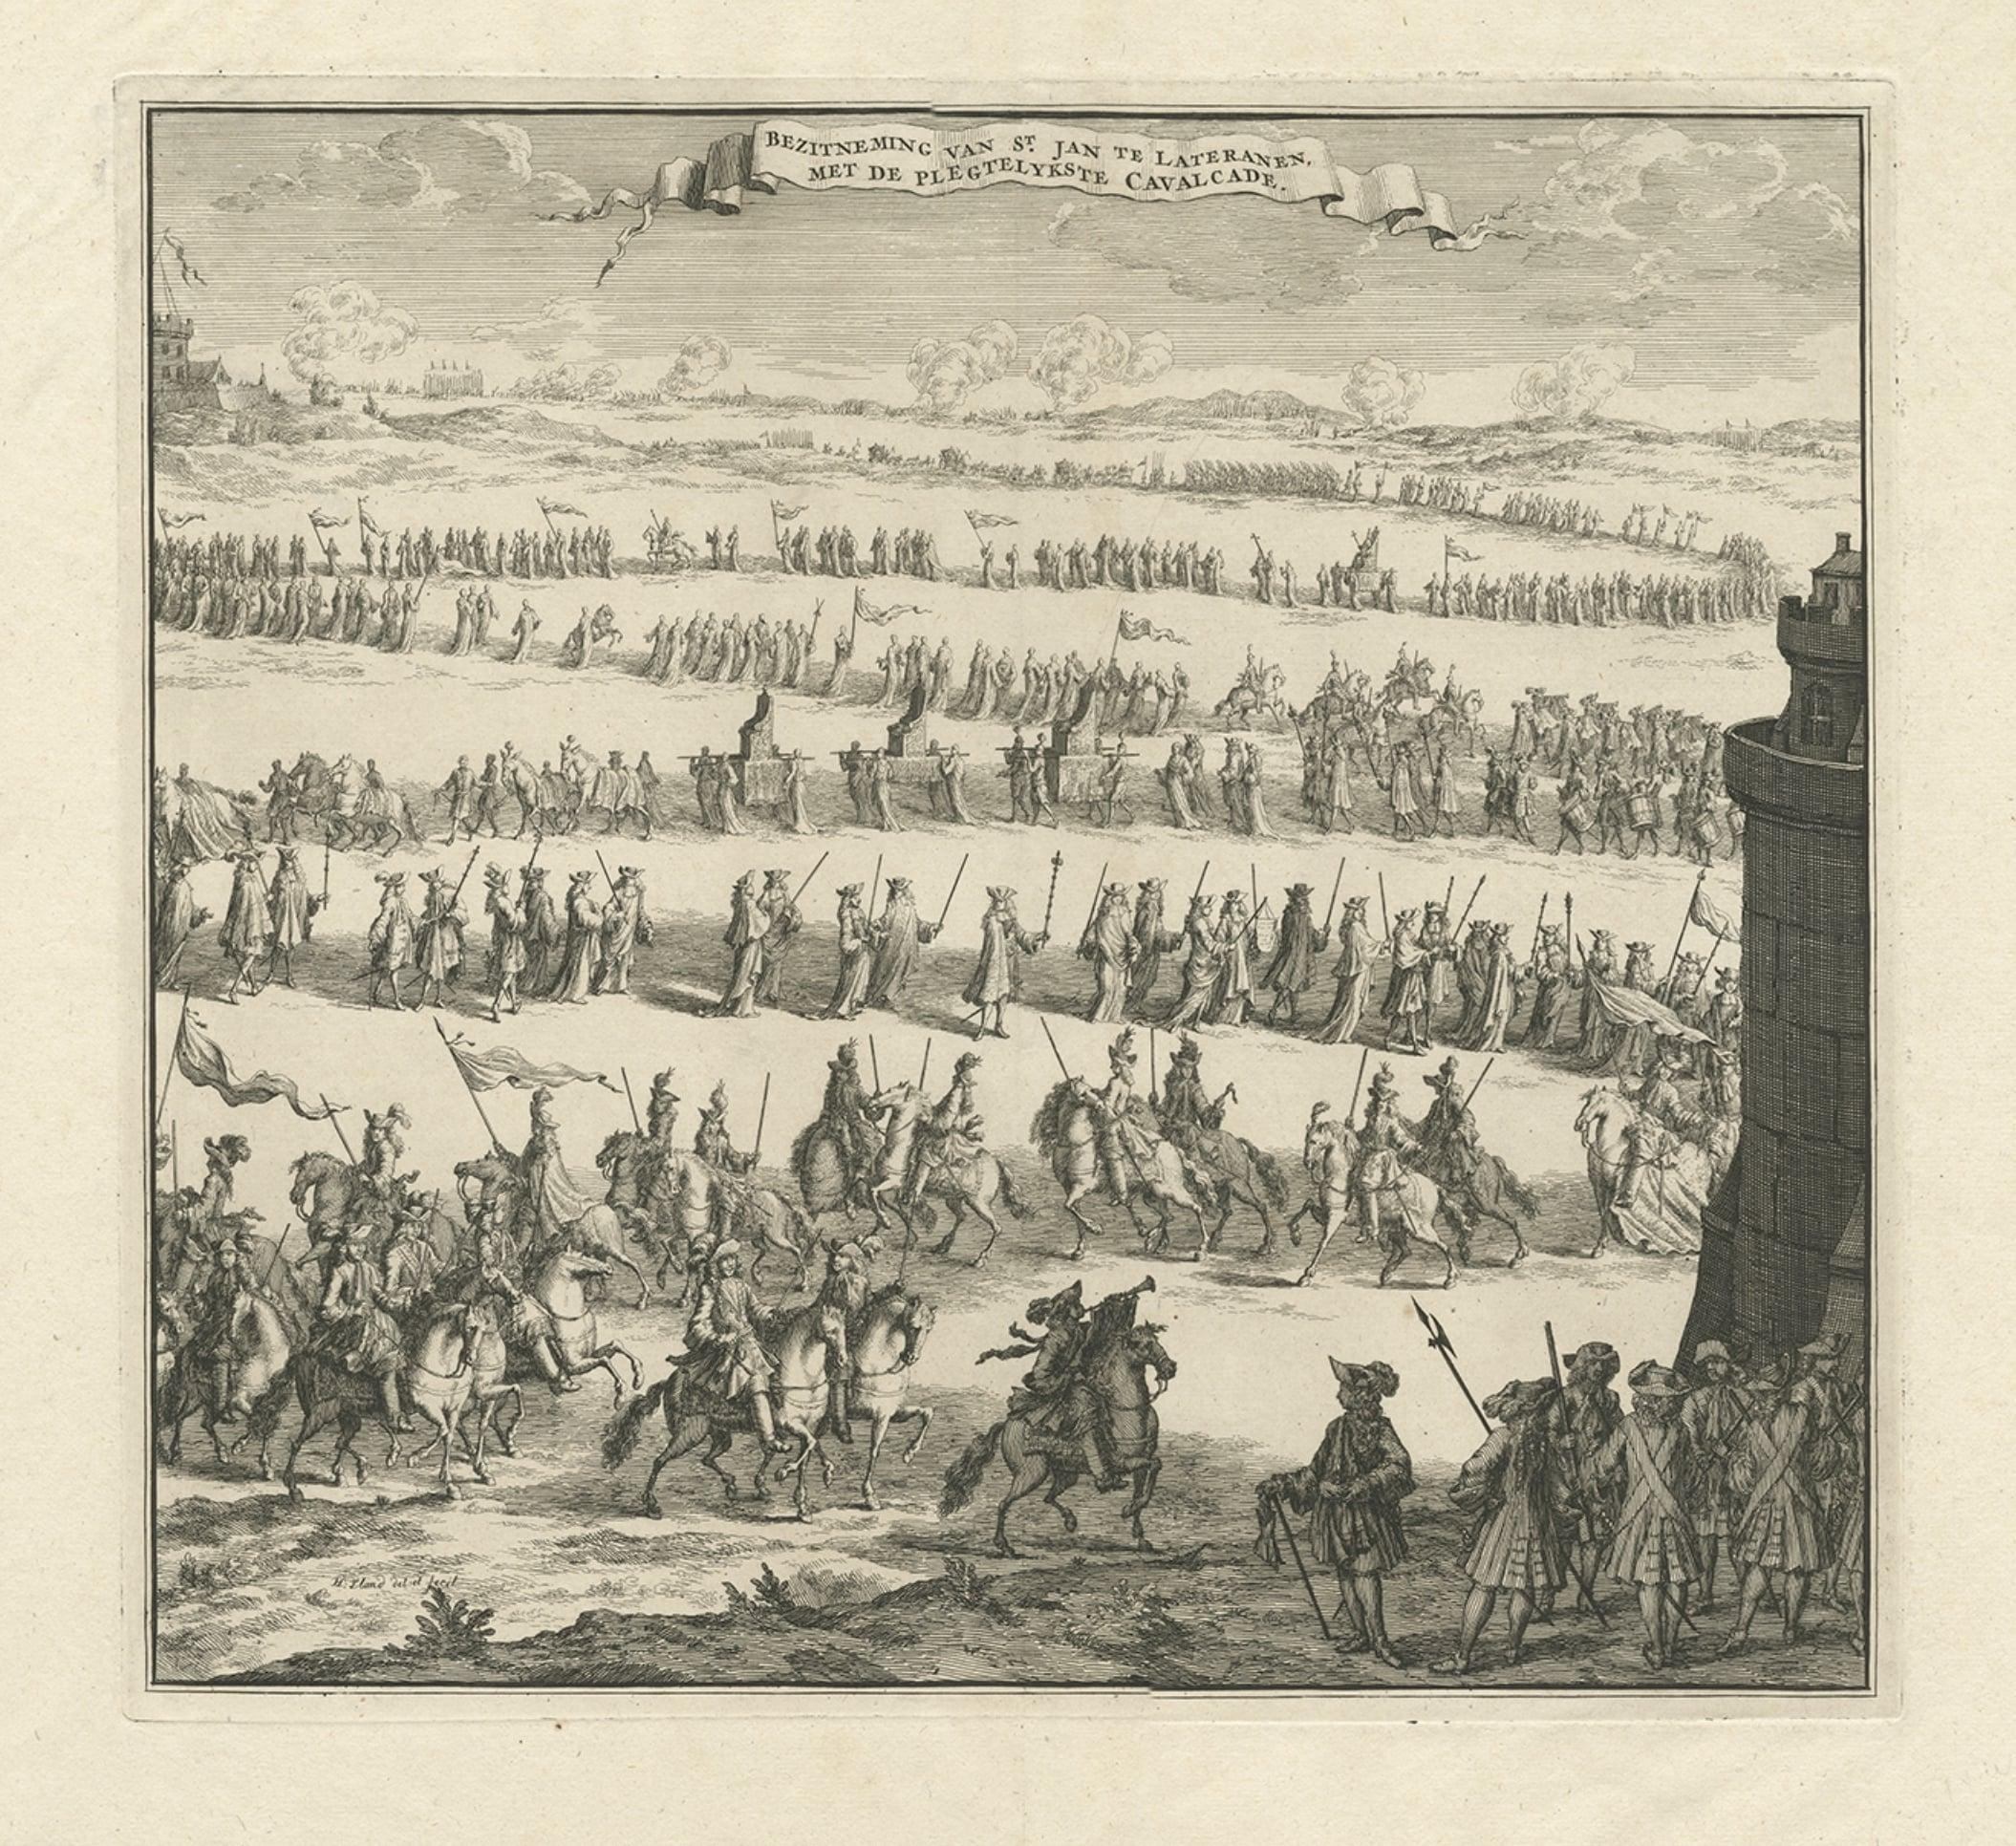 Antique print titled 'Bezitneming van St. Jan te Lateranen, met de Plegtelykste Cavalcade'. 

Procession of horsemen and cardinals during the entrance of a new pope in the Saint John Lateran, the former papal residence in Rome. Source unknown, to be